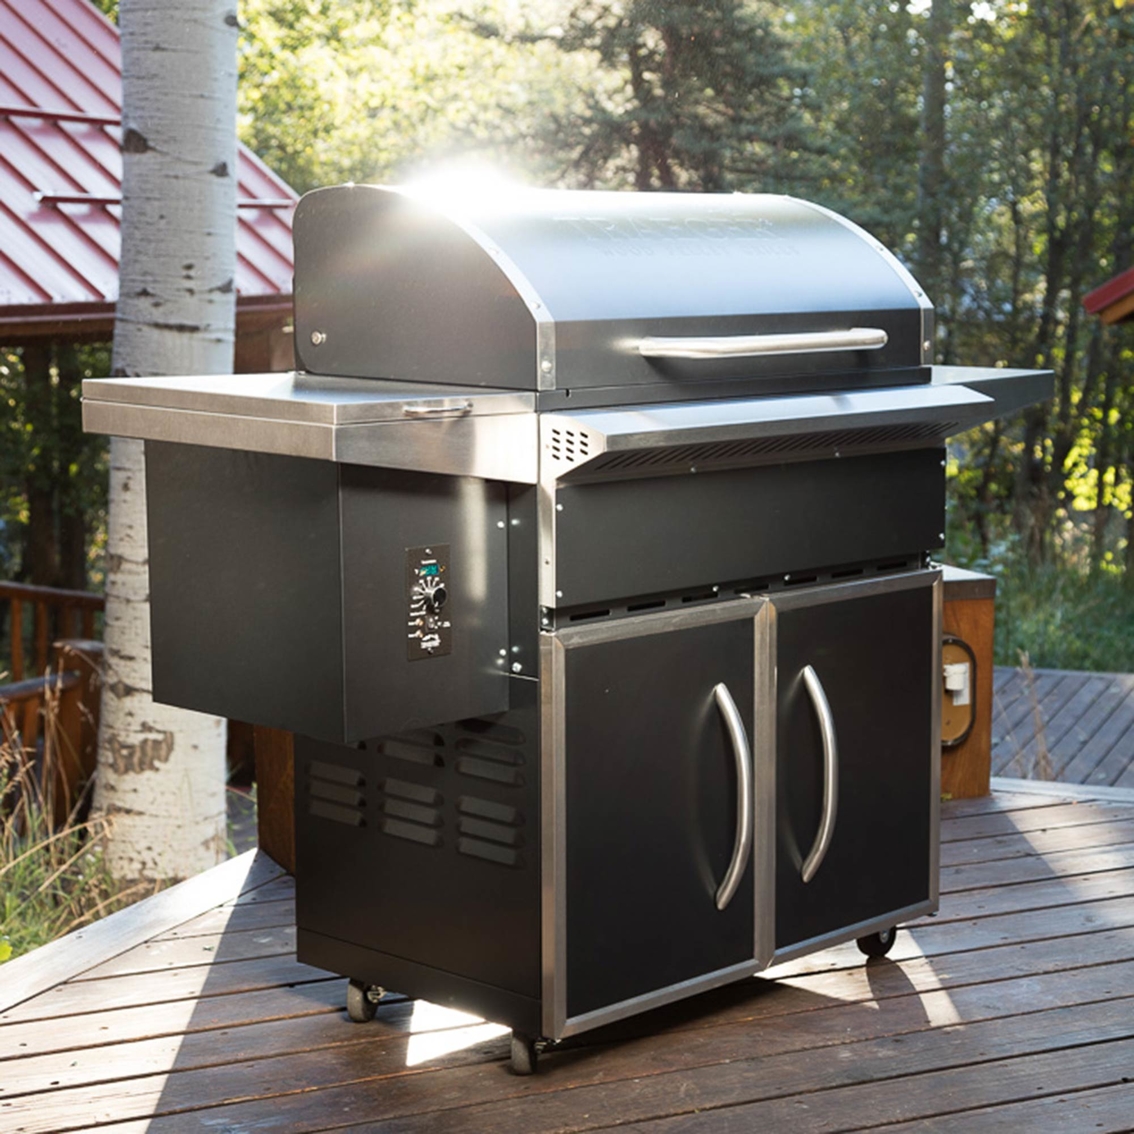 Traeger Select Pro Wood Fired Grill - Image 4 of 4